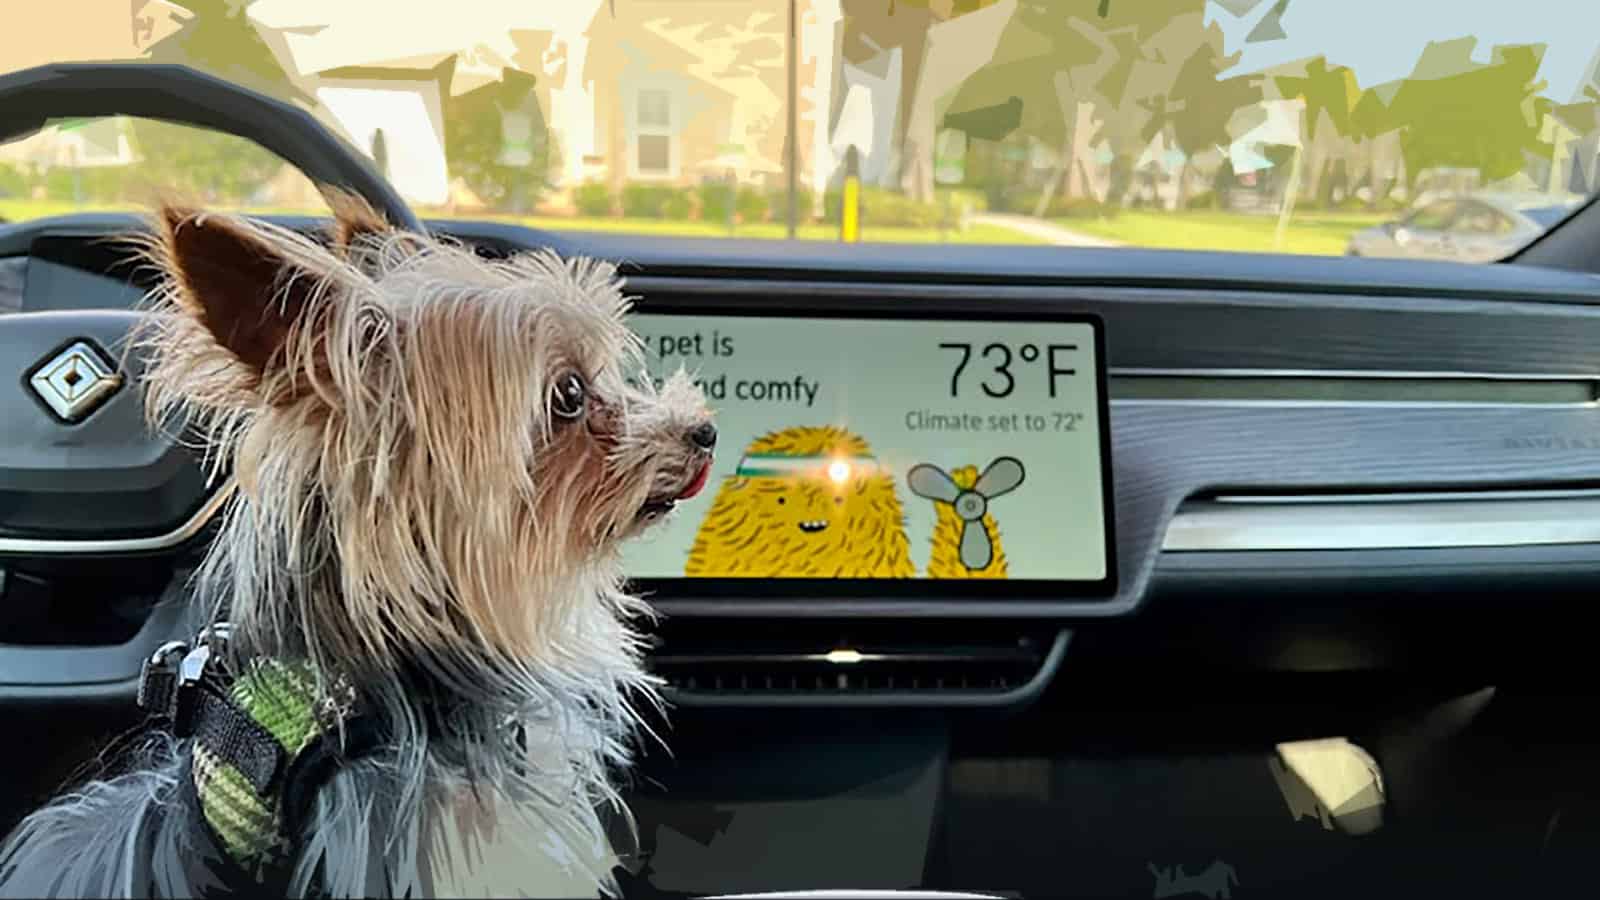 Rivian Wants To Keep Dogs Safe With New Pet Comfort Mode